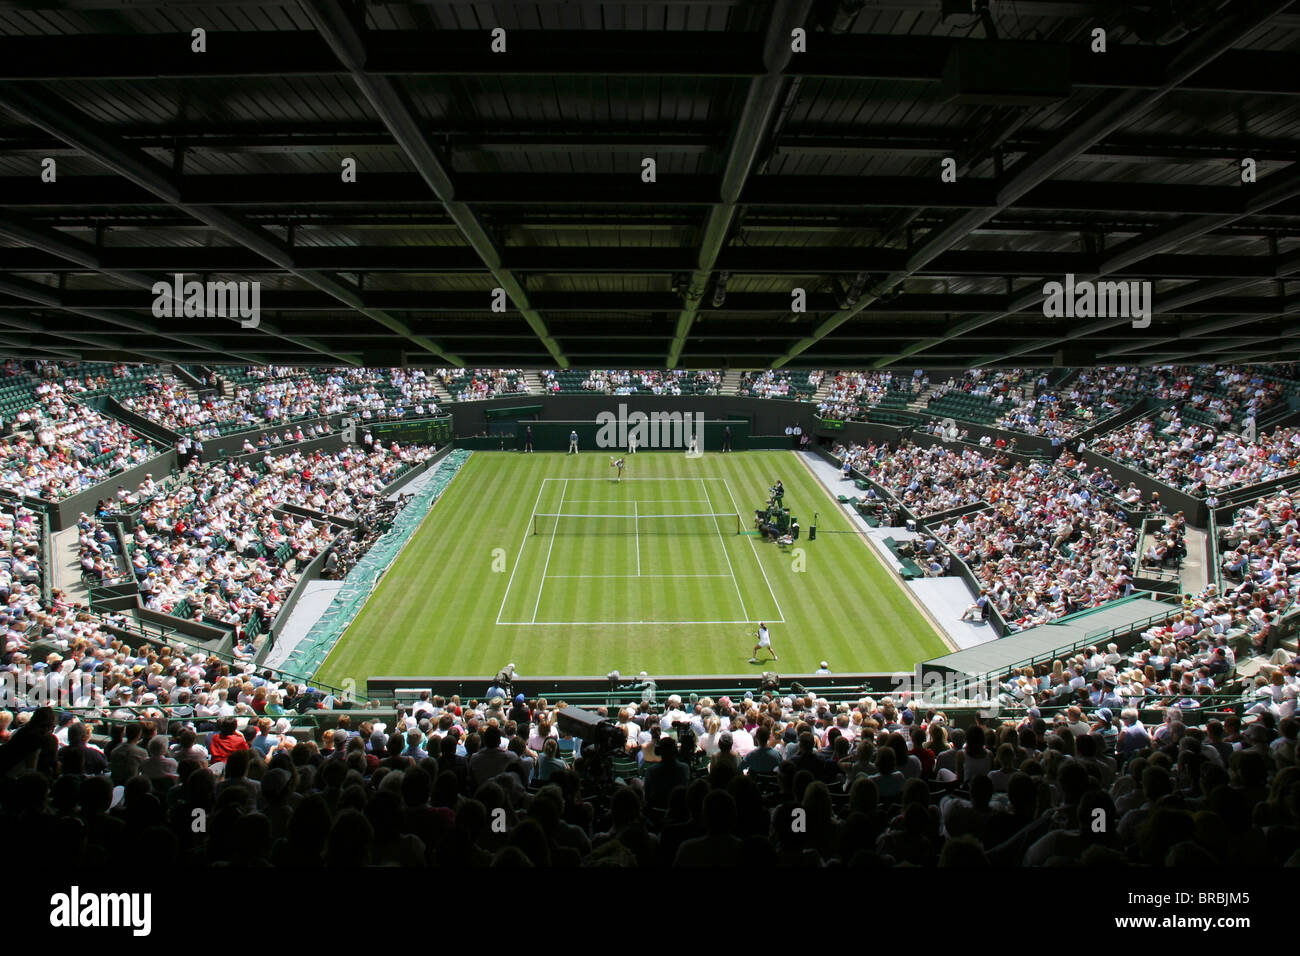 Large crowd watching a tennis match on grass court Stock Photo